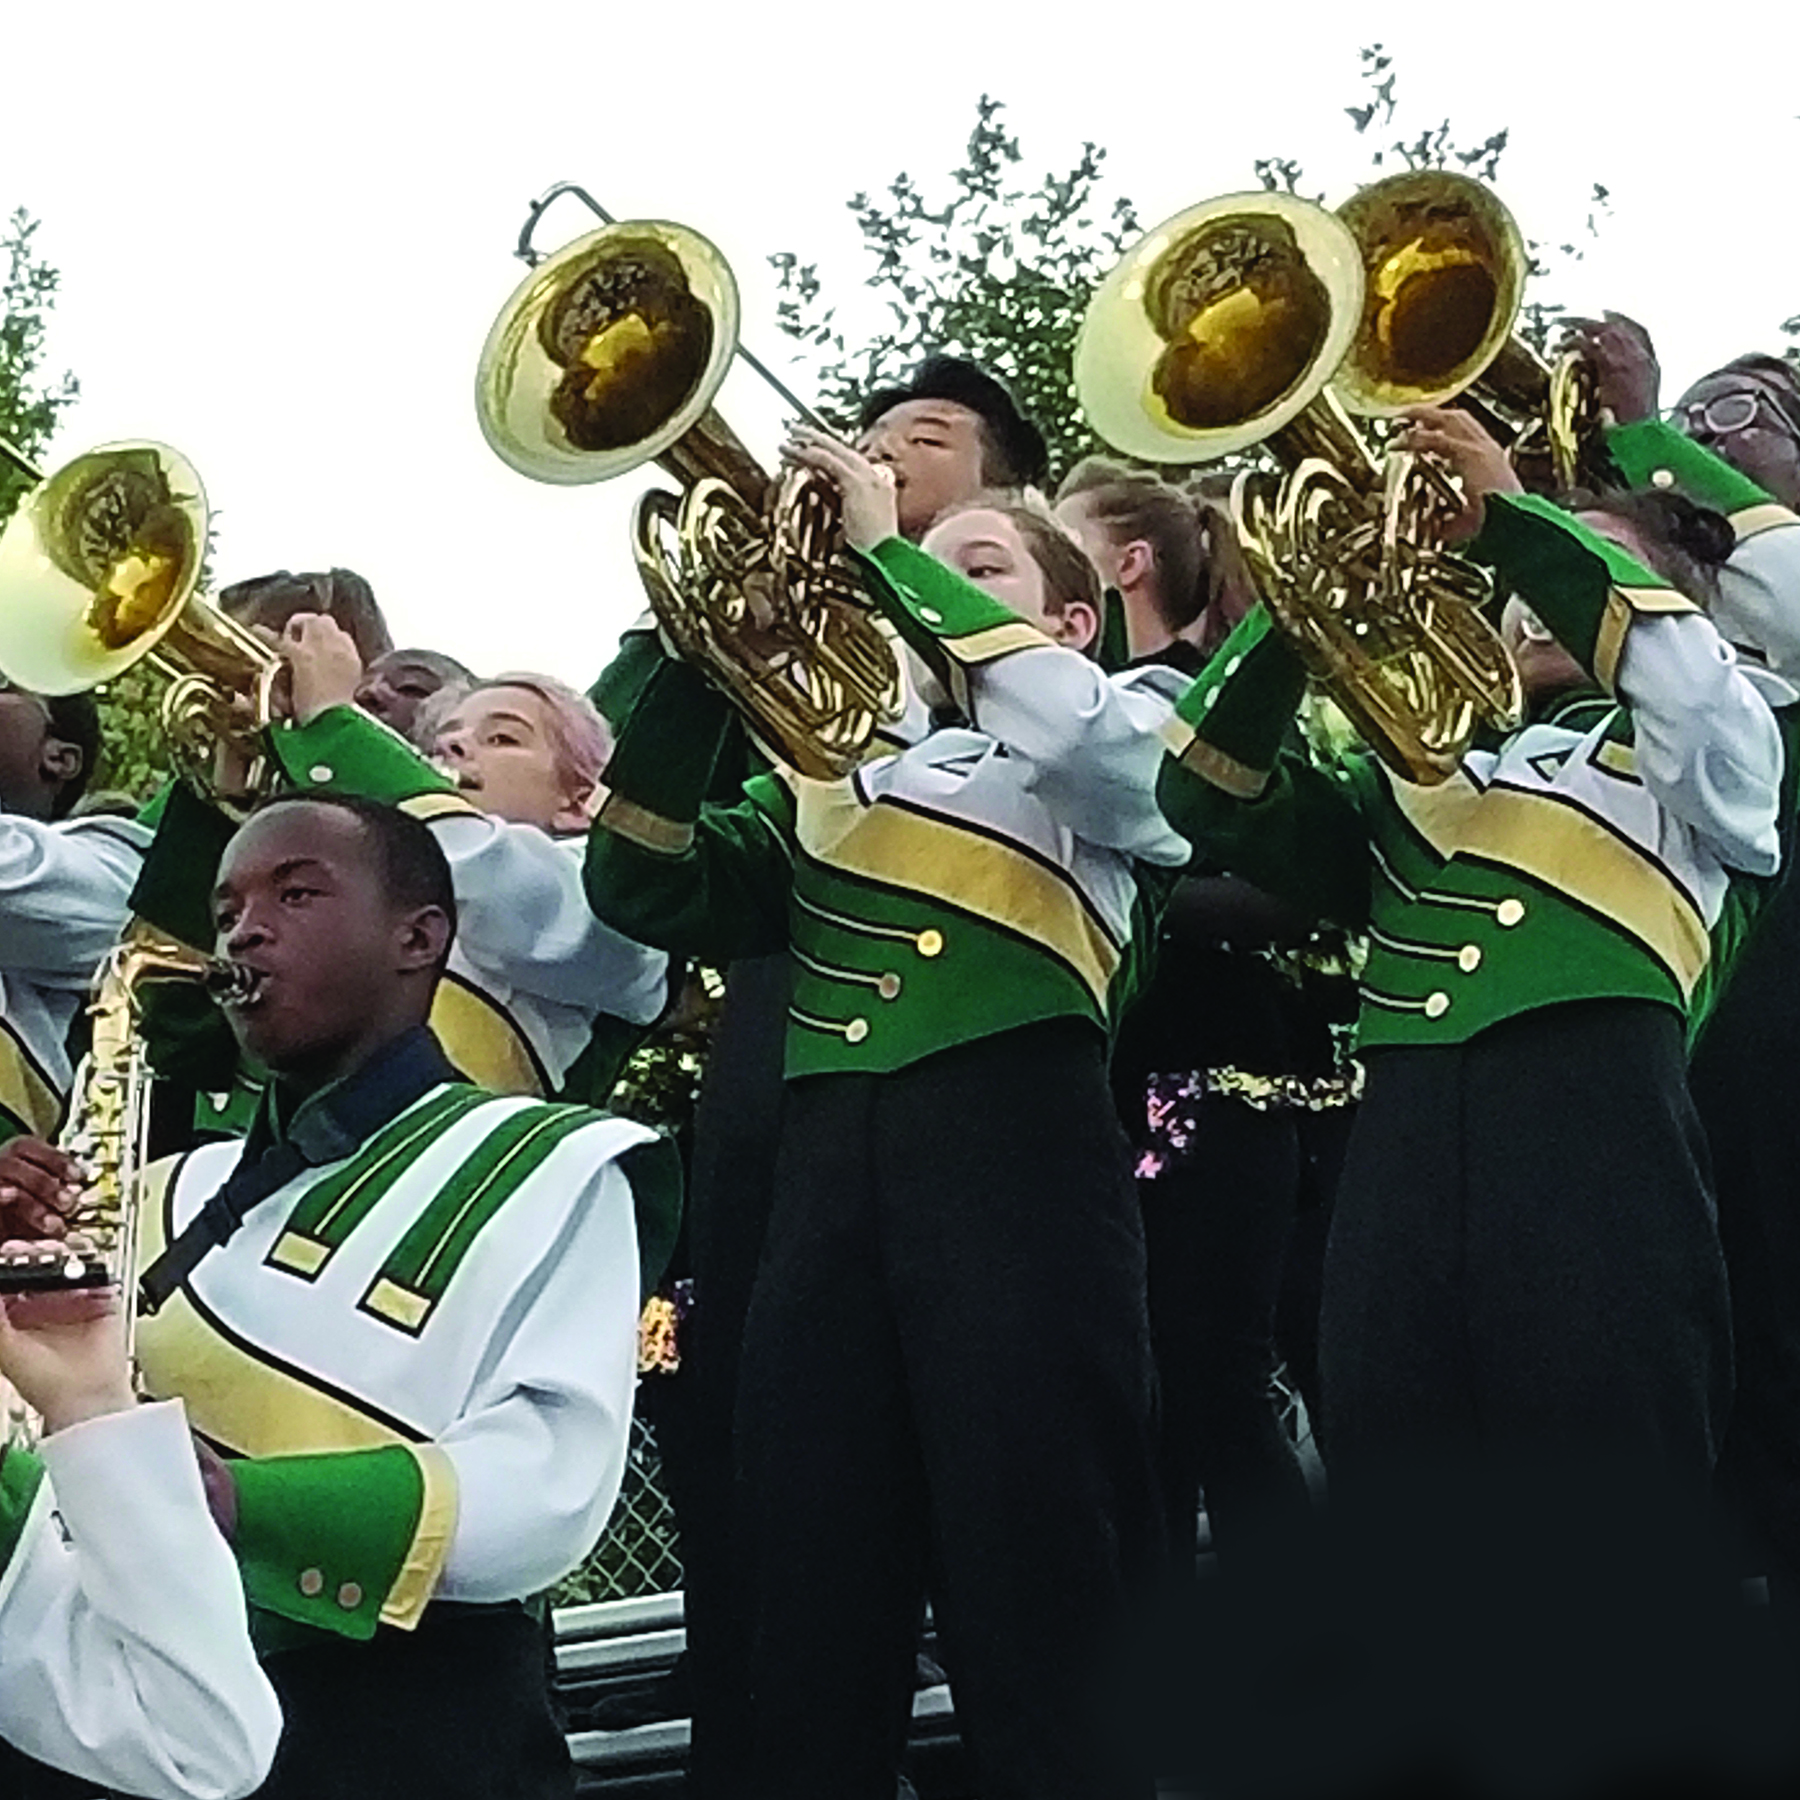 A high school band horn section plays in uniform